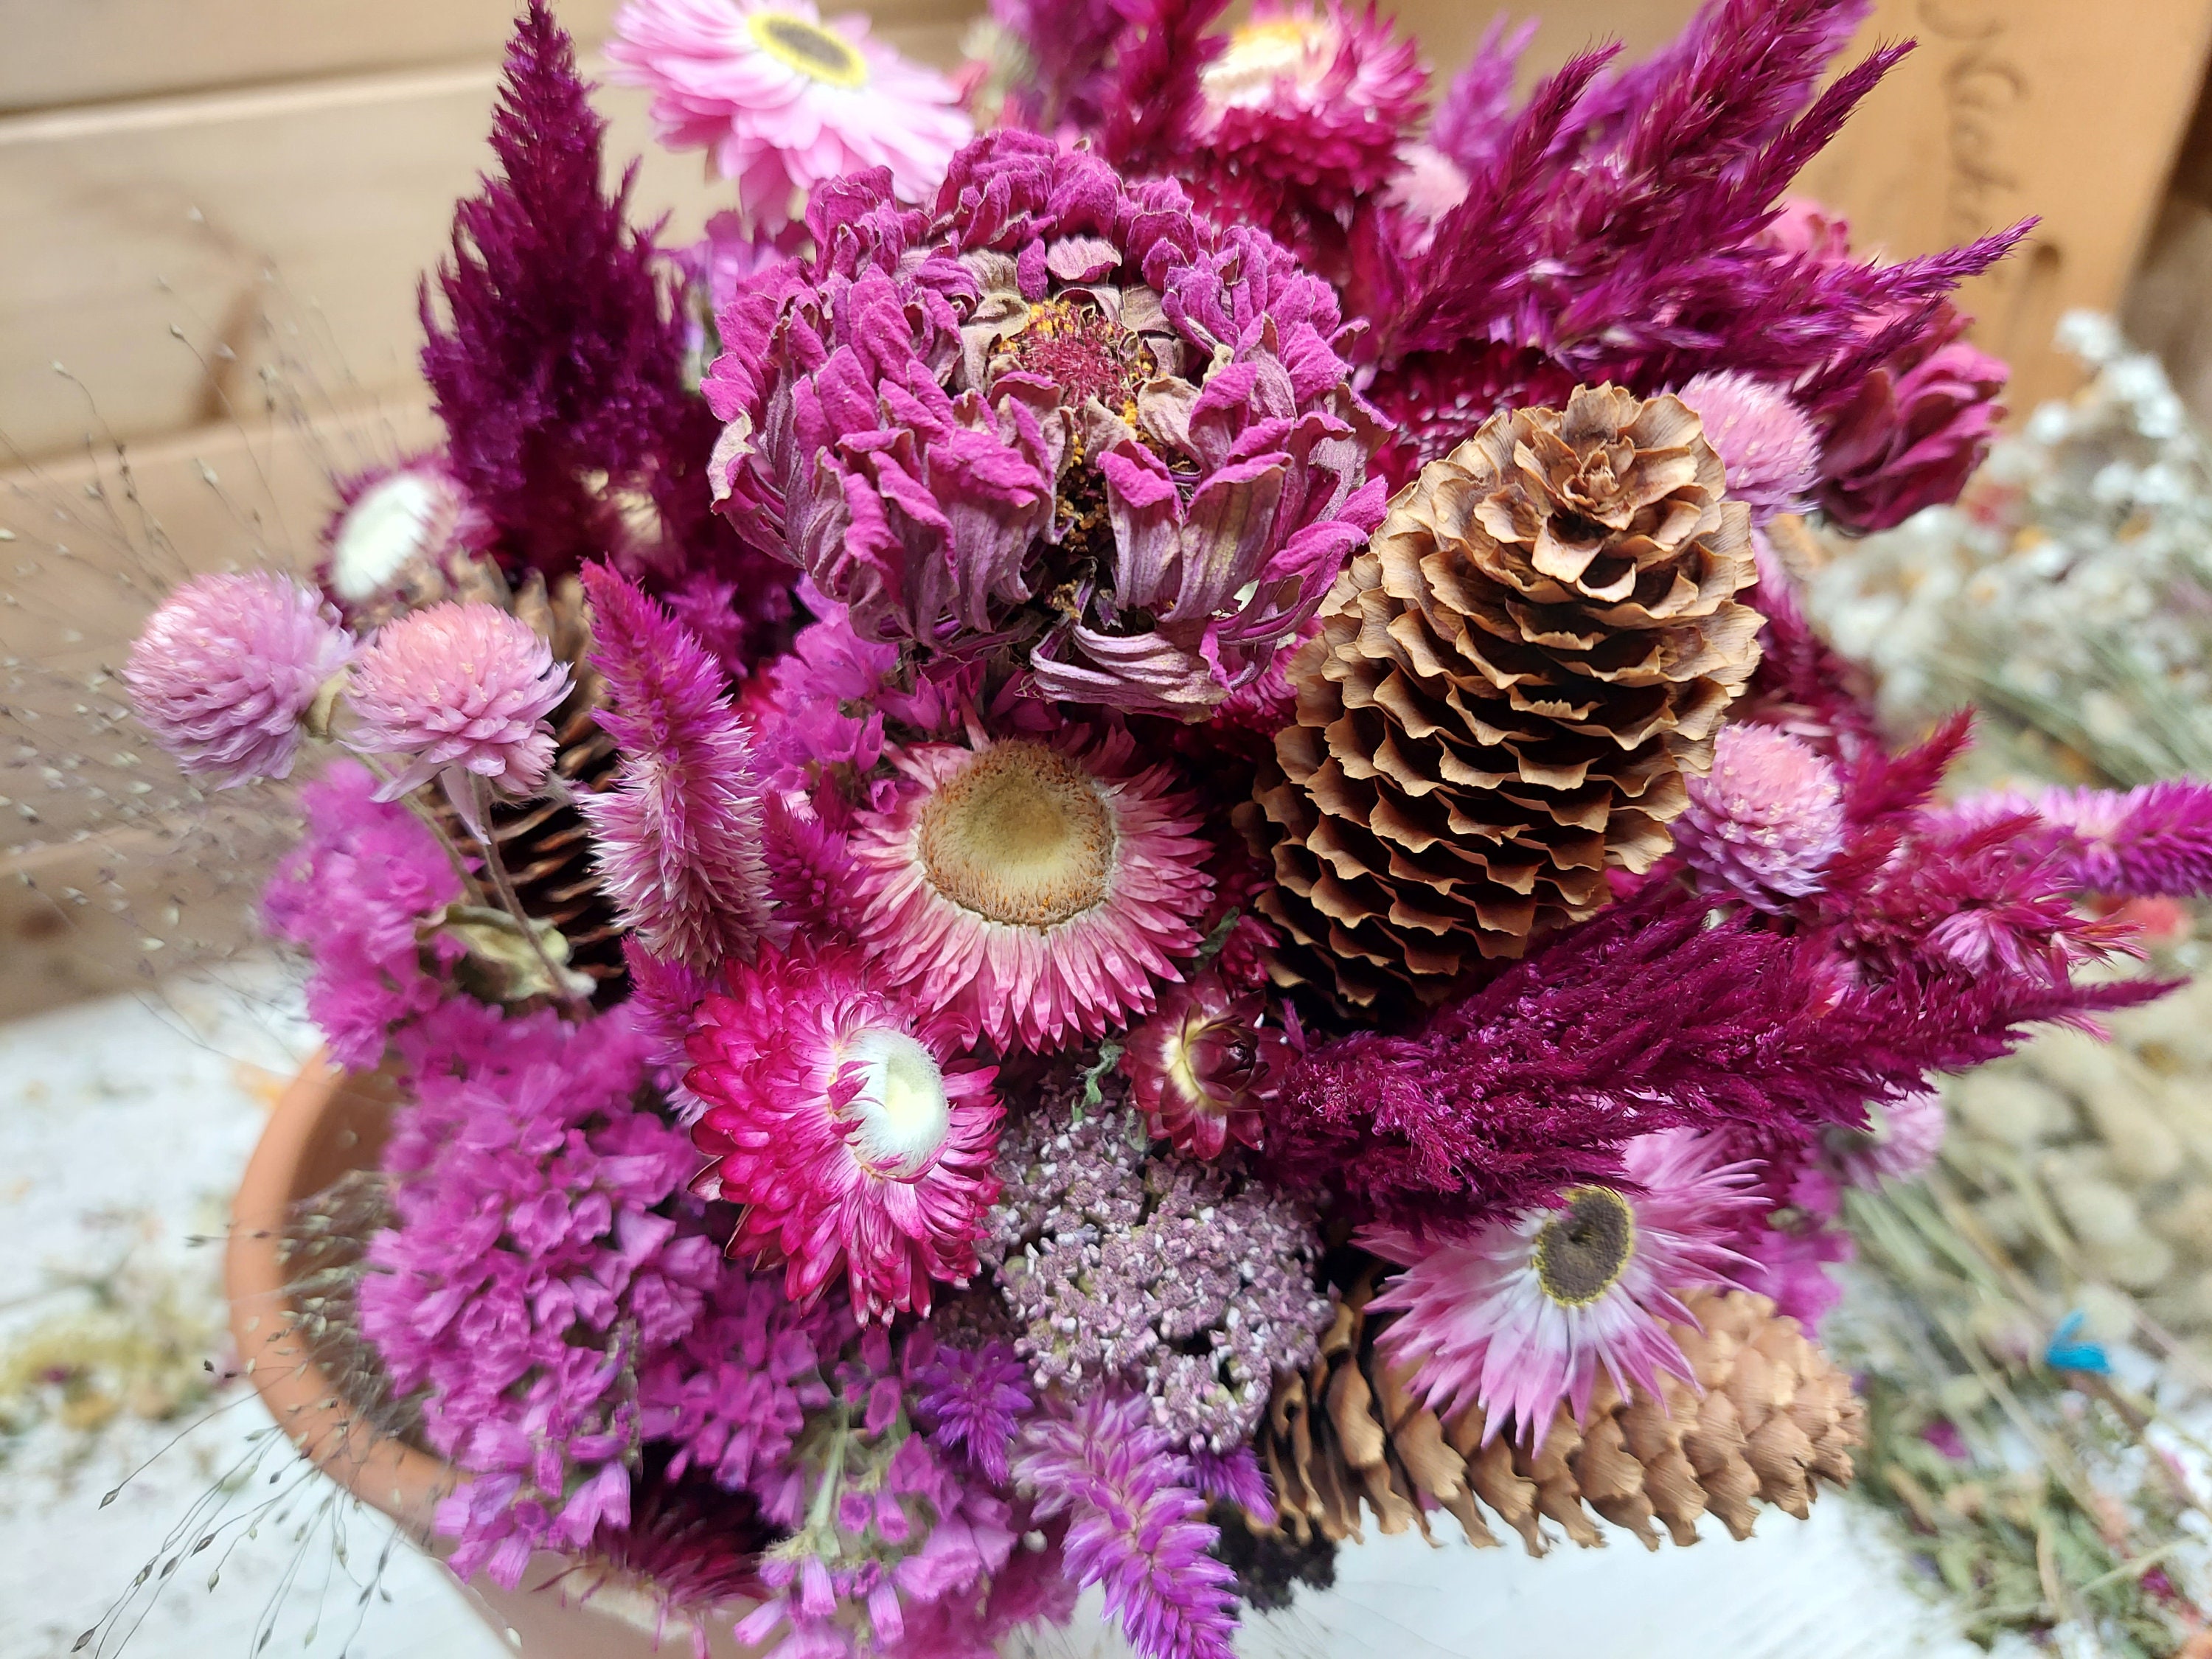 Pressed Celosia Flowers 12 Real Dried Pink Flower Spikes for